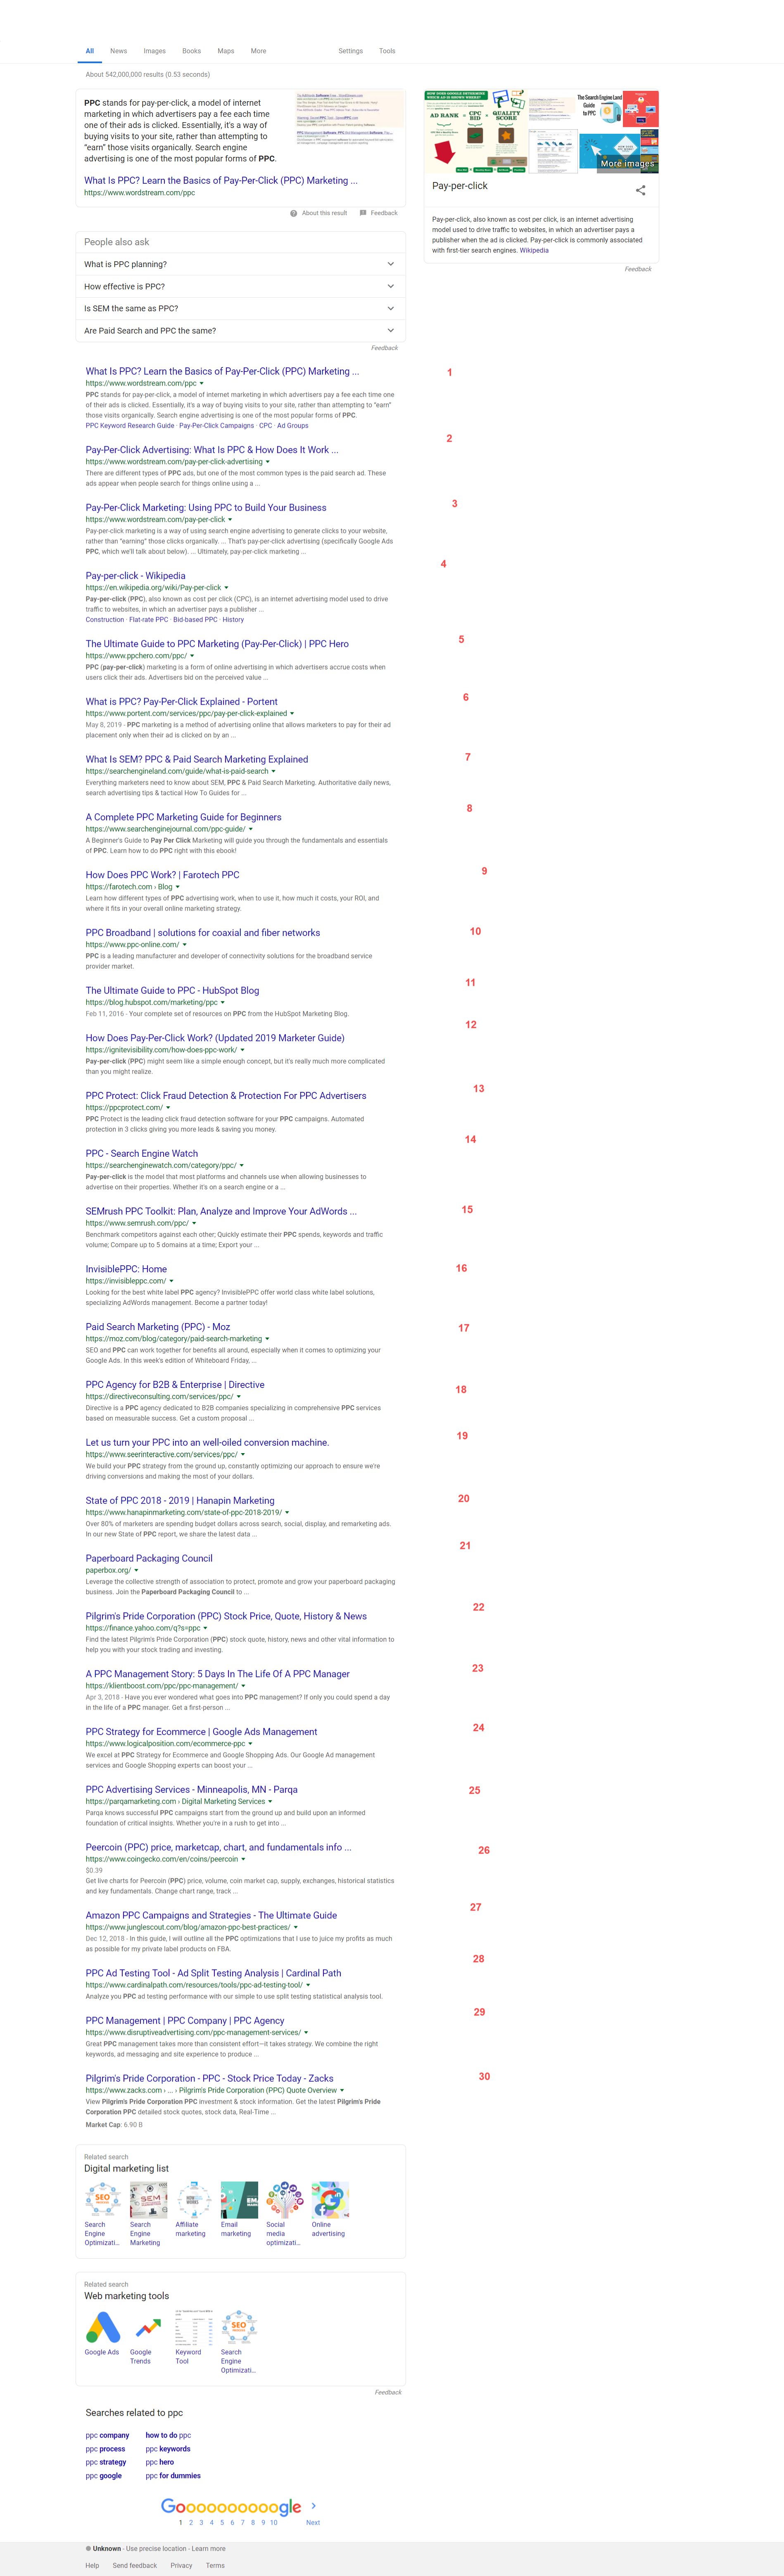 Google Displays an Unusual SERP With 30 Results